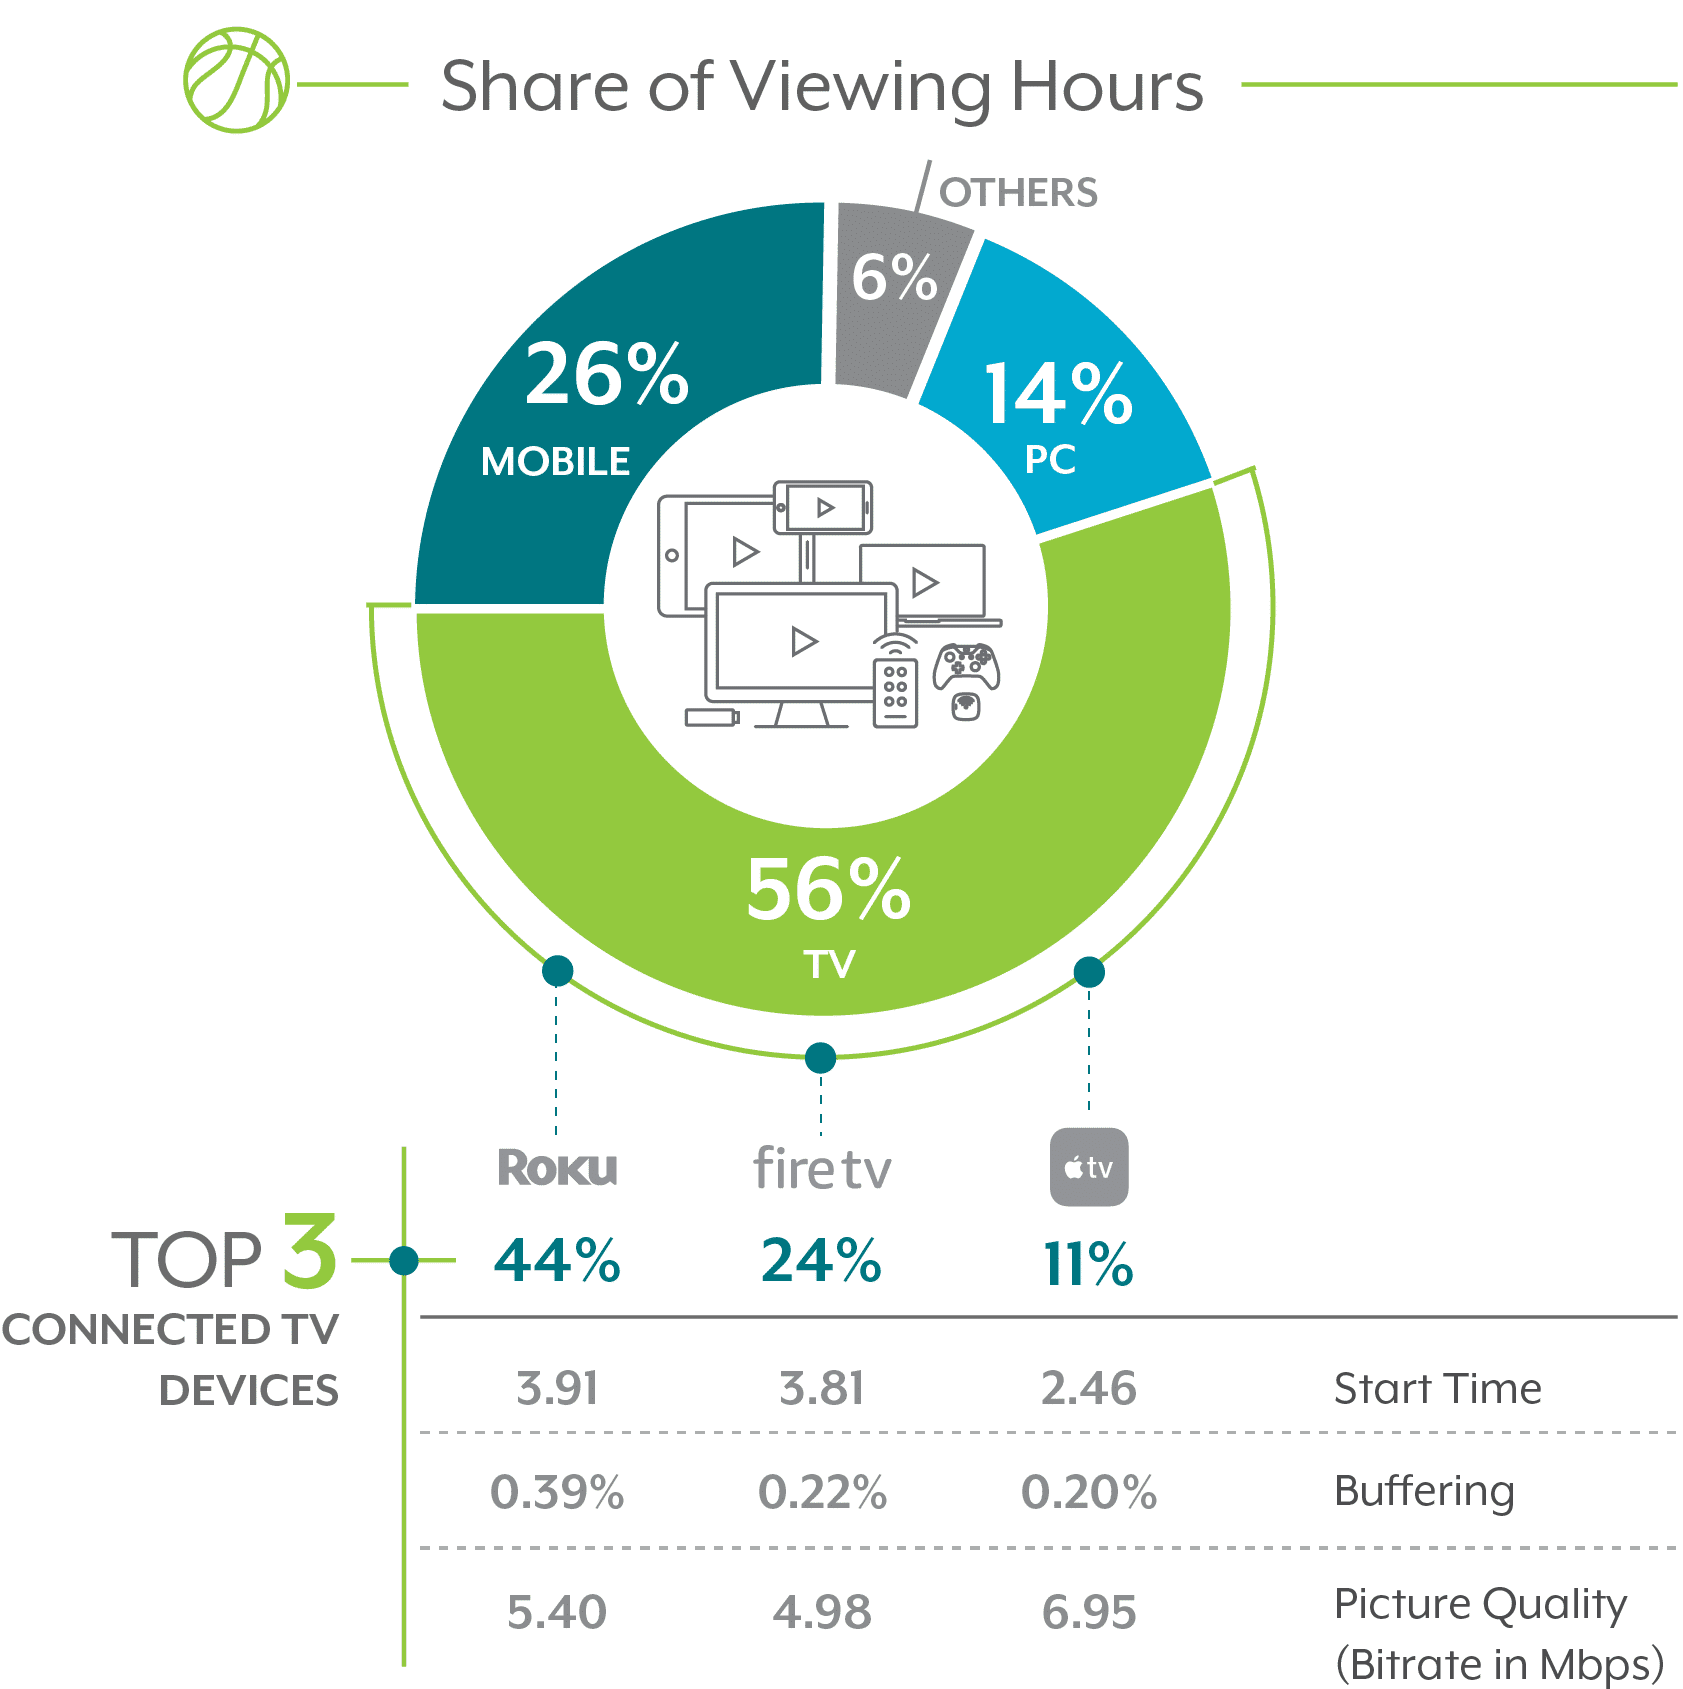 Conviva's March Madness Pie Chart Of Share Viewing Hours For Top 3 Connected TV Devices